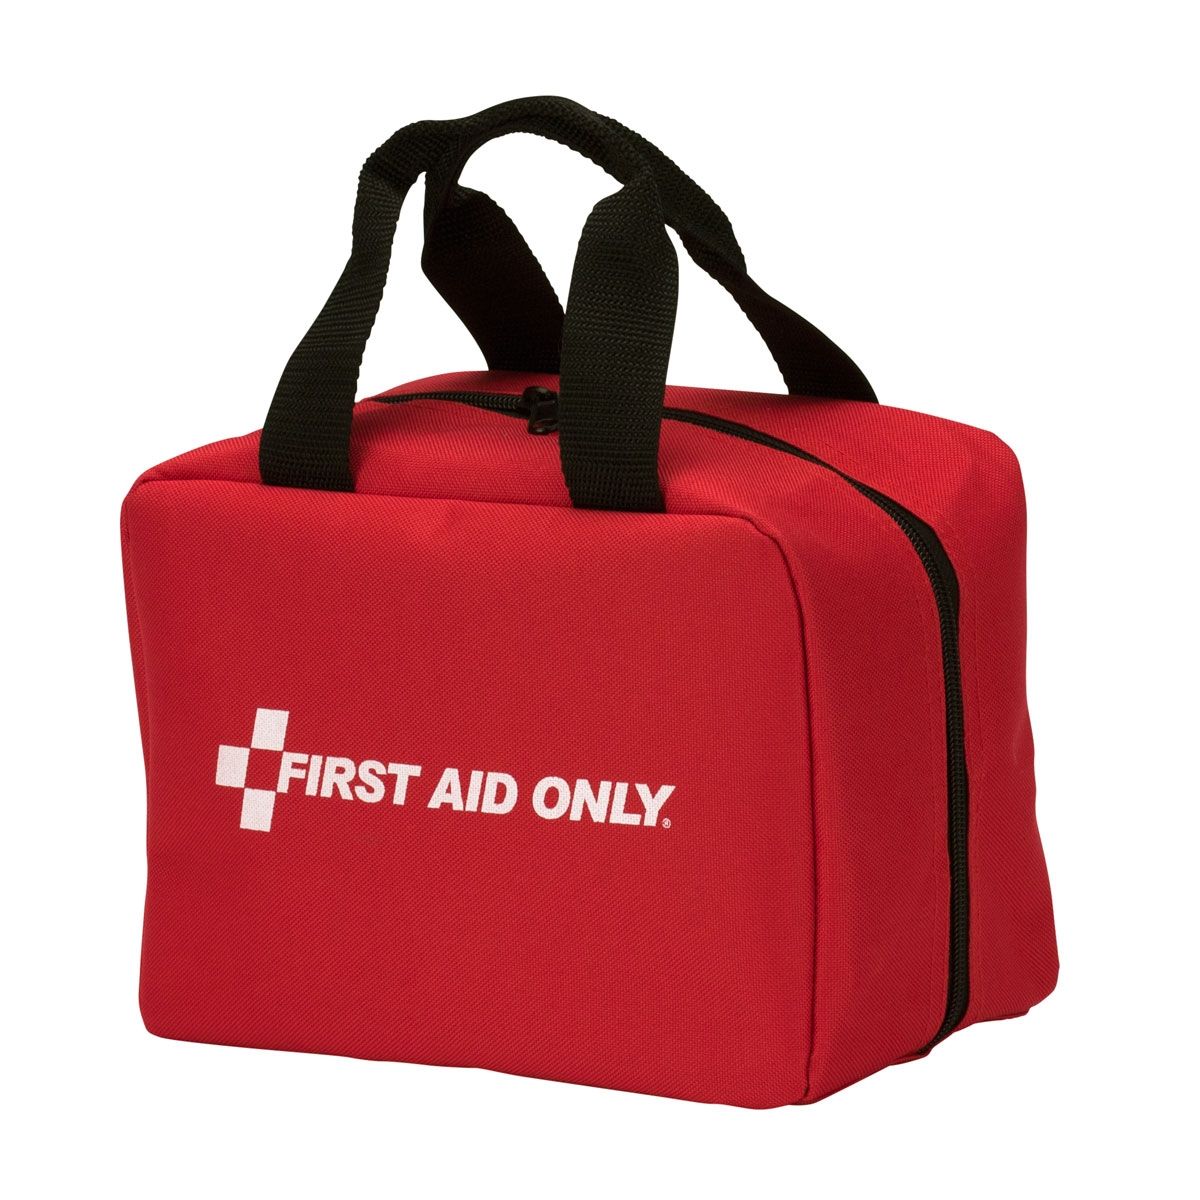 First Aid Only 50 Person Bulk Fabric First Aid Kit ANSI Compliant 90599